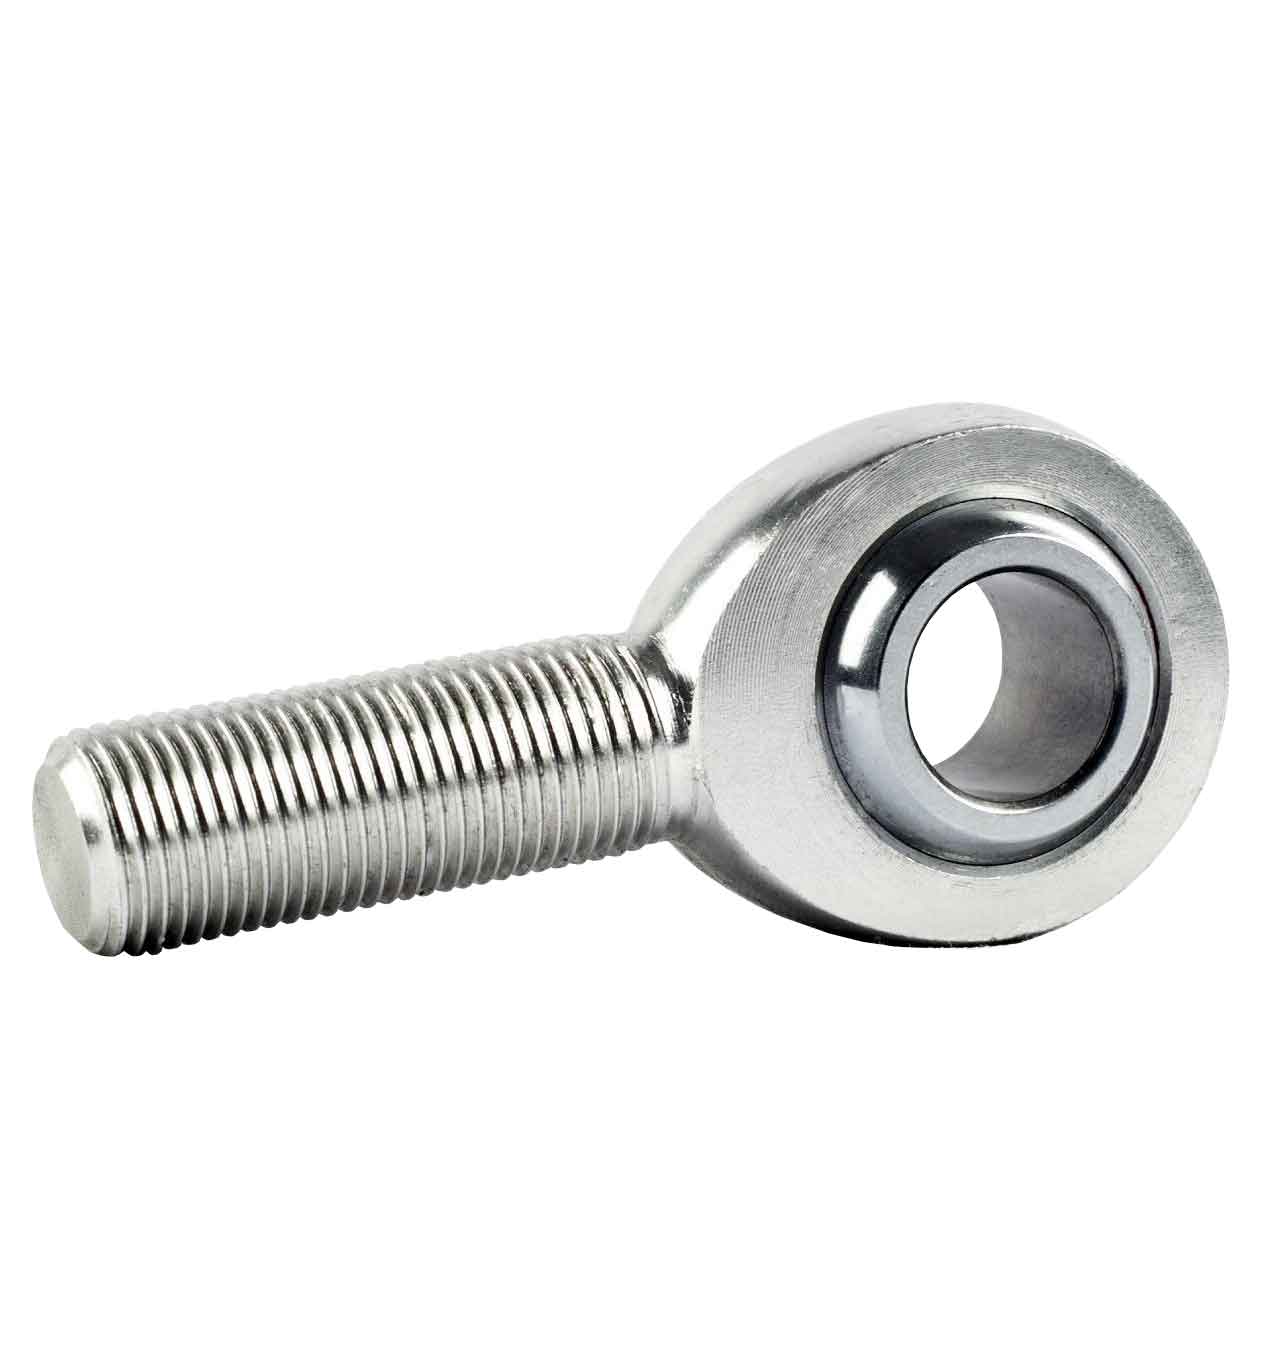 SS-POS8L GENERIC 8mm M8X1.25 STAINLESS STEEL MALE ROD END BEARING WITH LEFT HAND THREAD Thumbnail